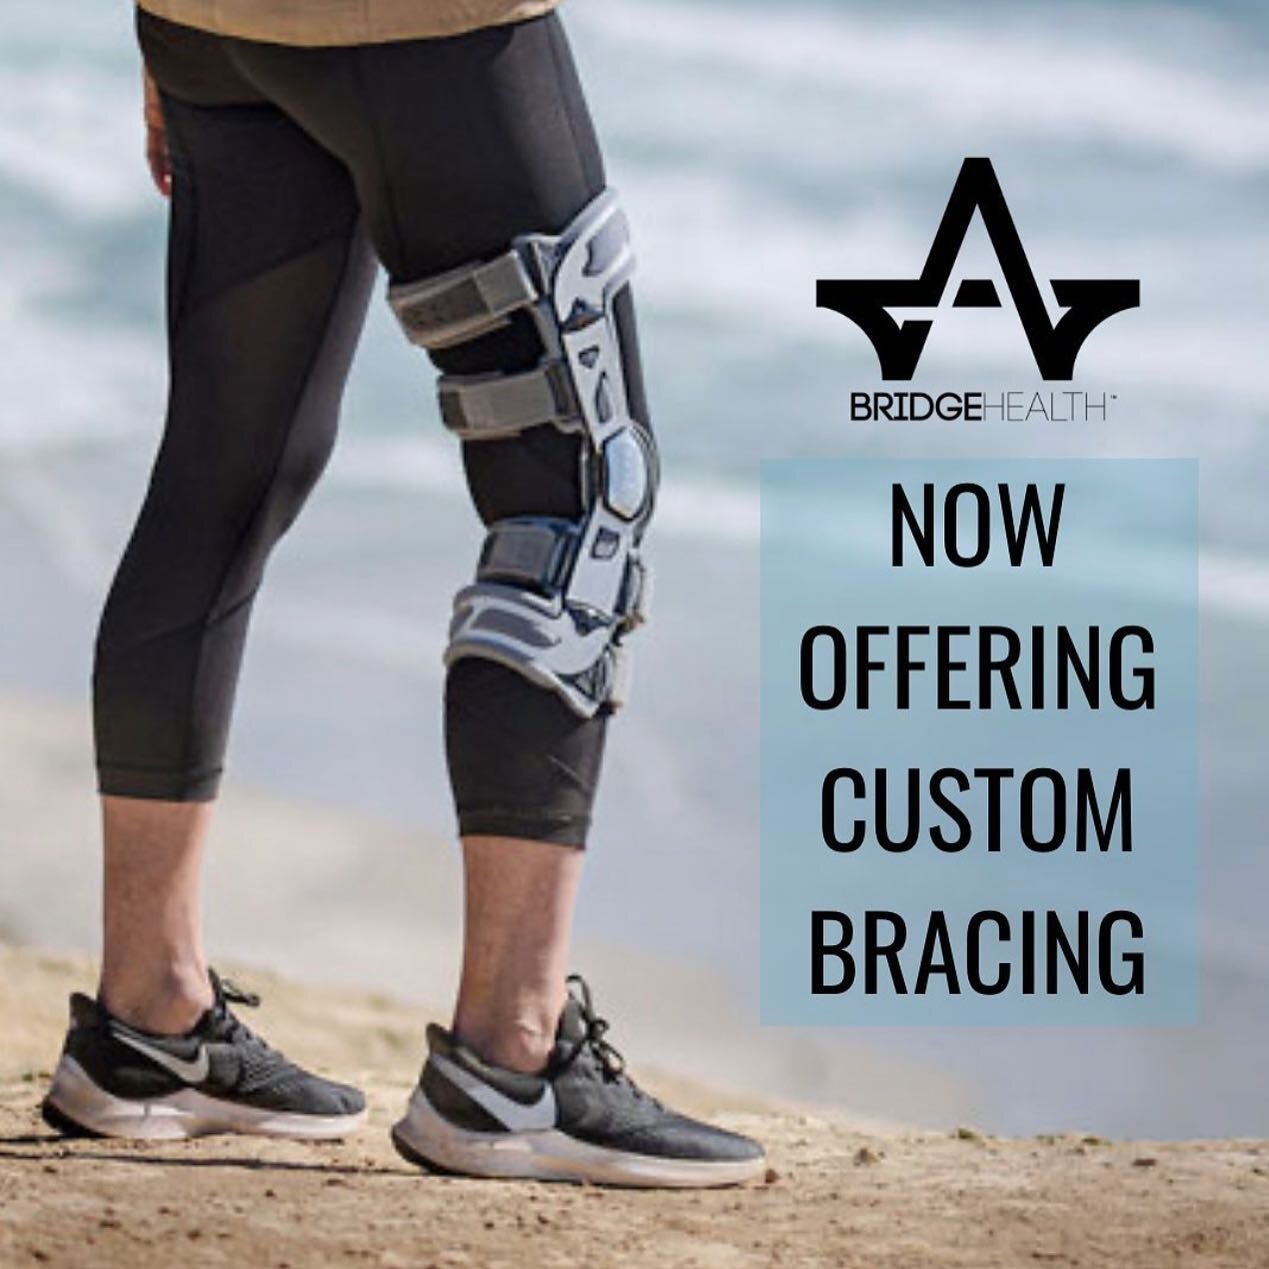 BridgeHealth offers custom fitted Donjoy knee braces for the following:

✅ De-rotational braces for return to sport after ACL injury or reconstruction
.
✅ Offloading braces for osteoarthritis of the knee

Call us at (416)583-2602 or email info@bridge